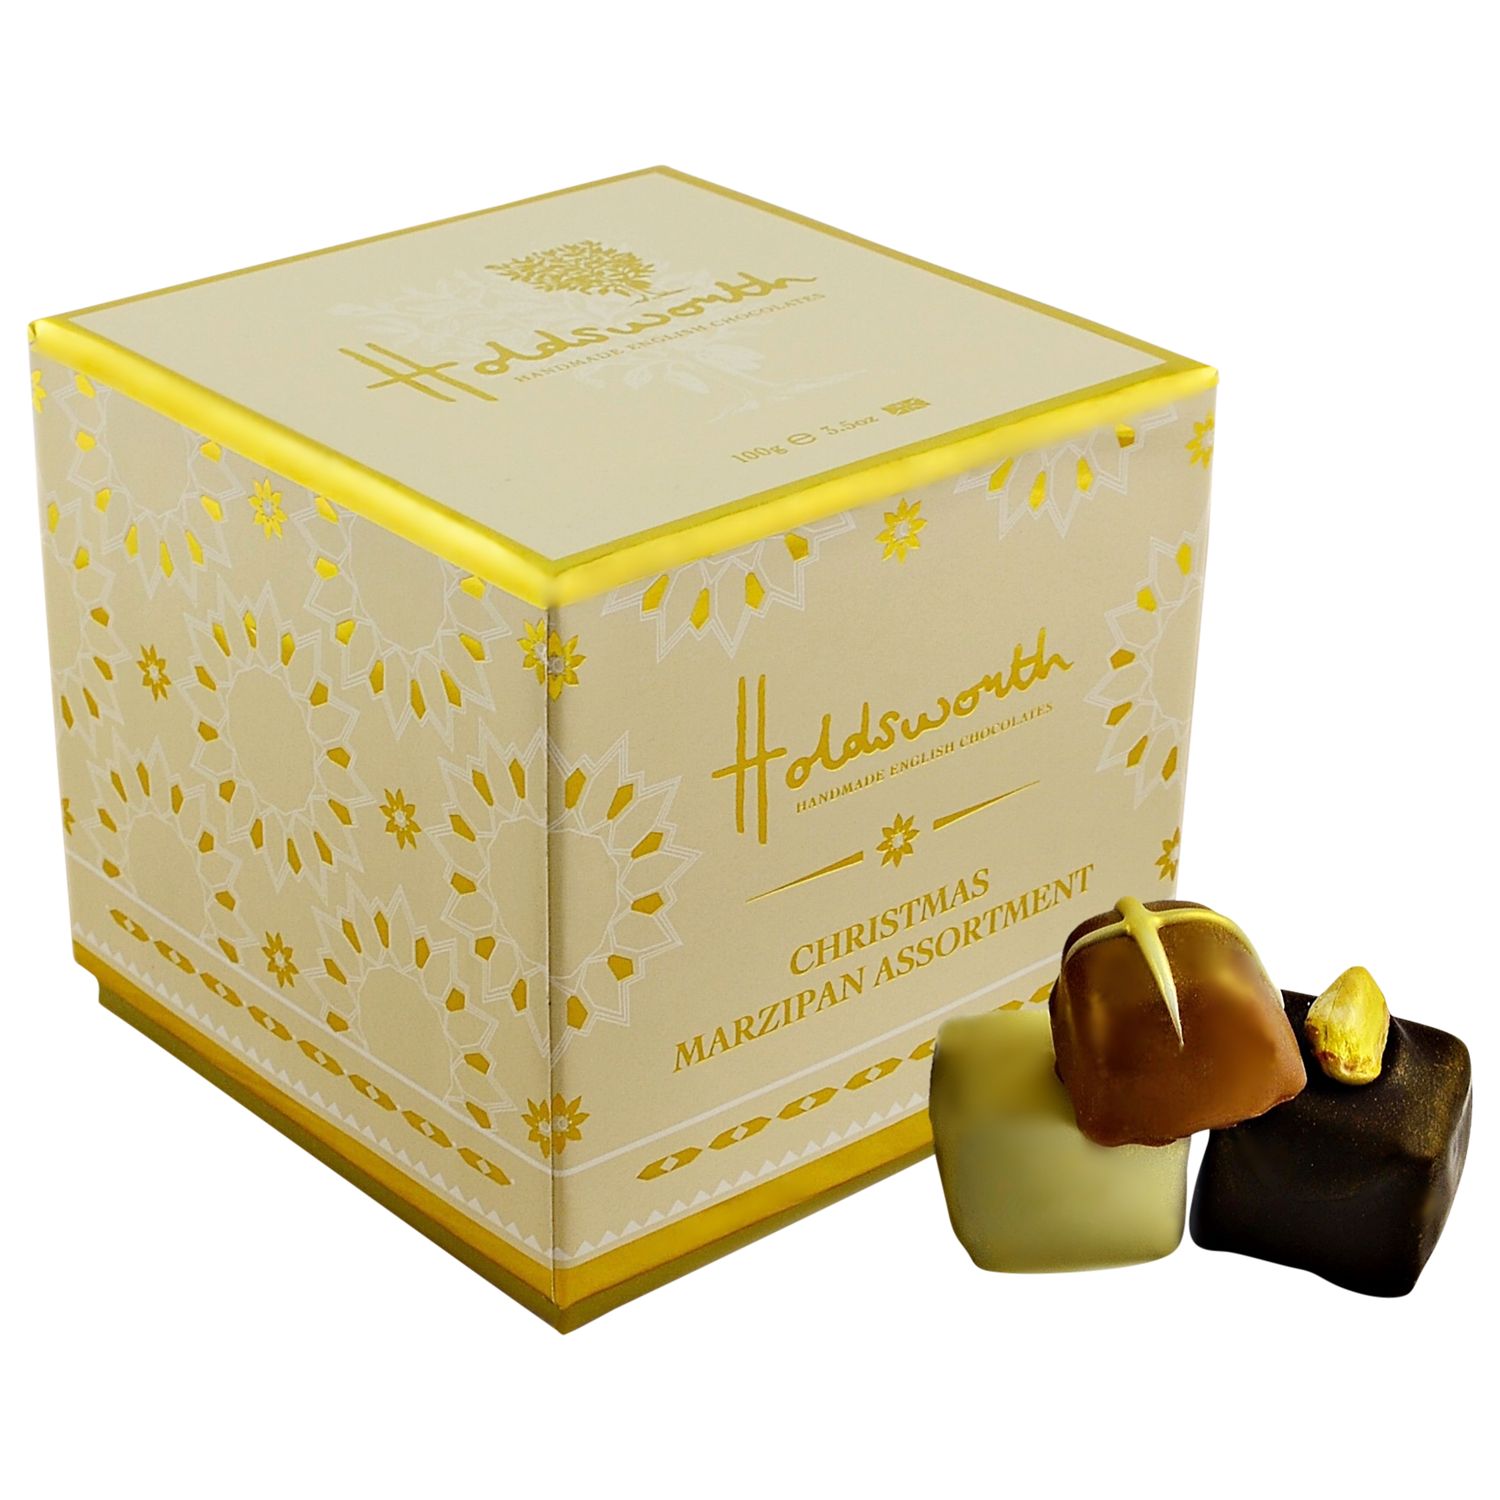 Holdsworth Truly Scrumptious Christmas Marzipan Assortment, 100g